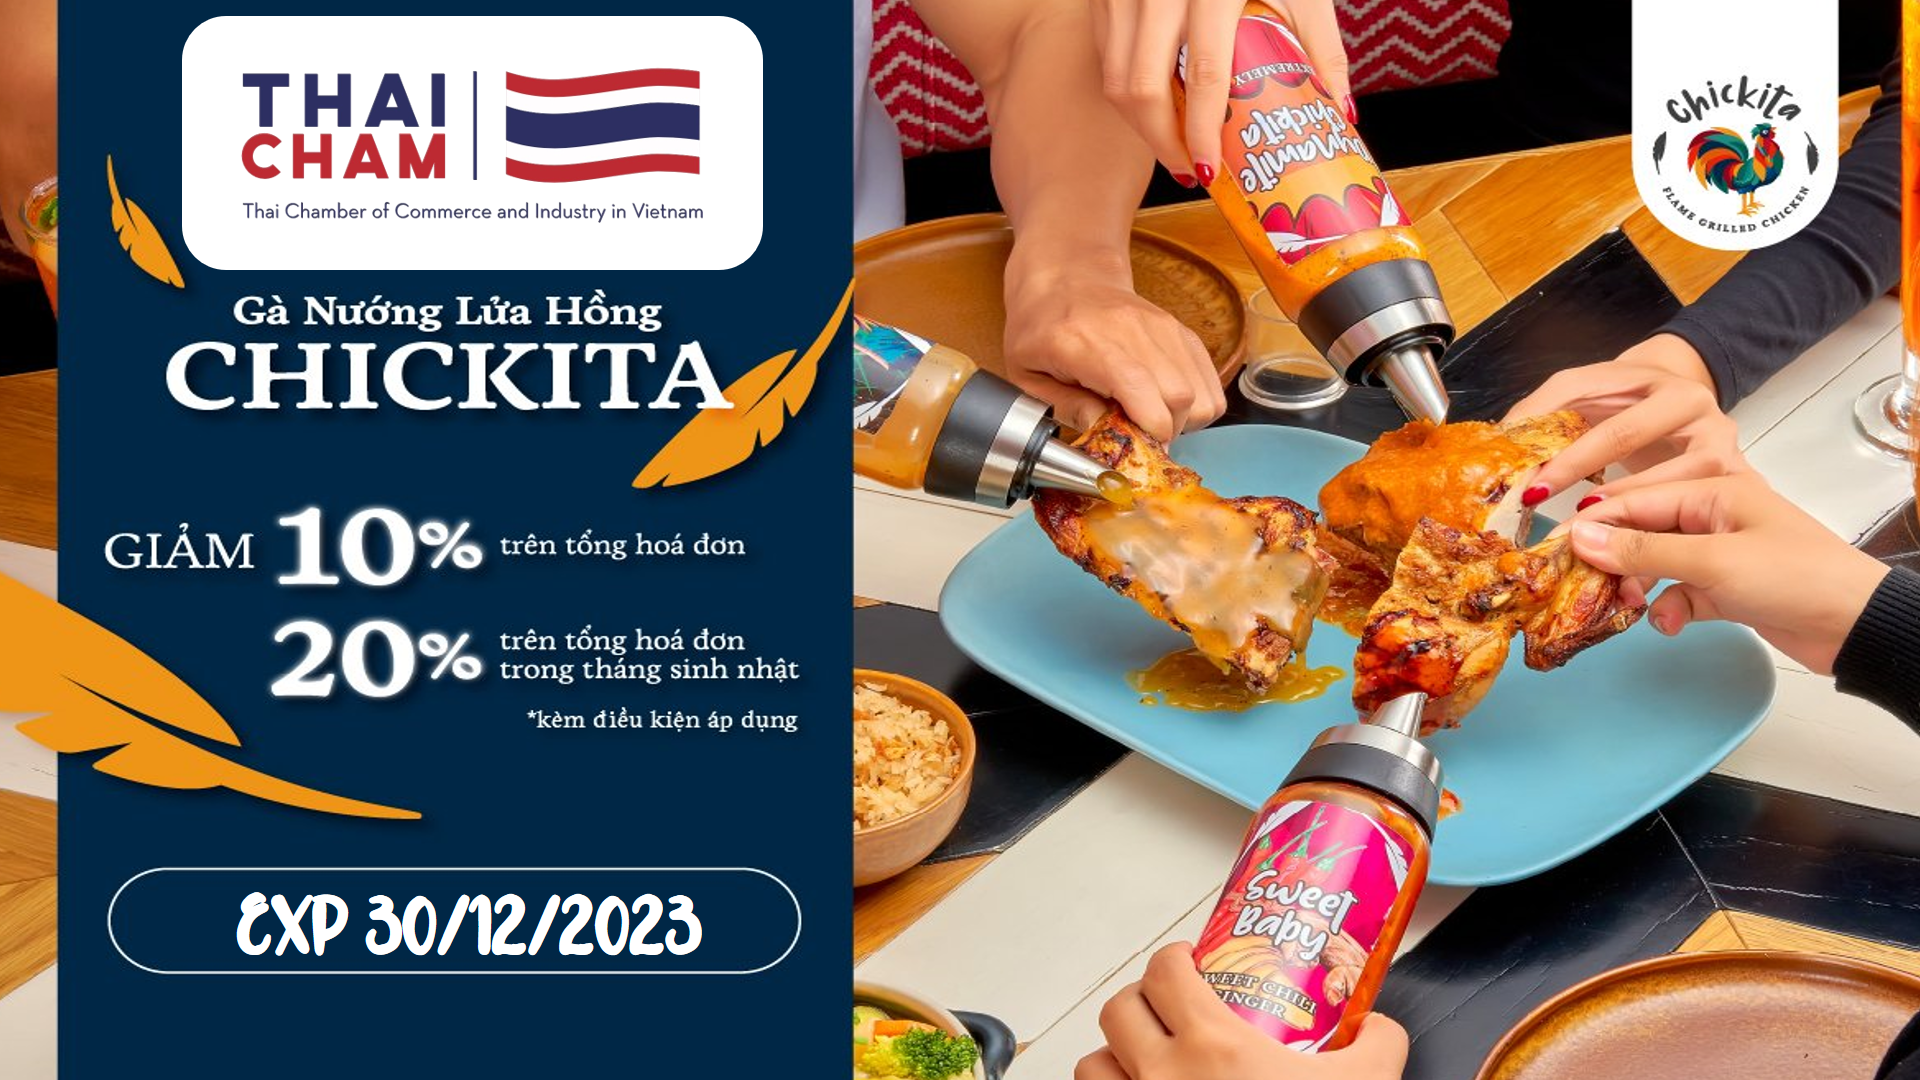 CHICKITA – Flame Grilled Chicken